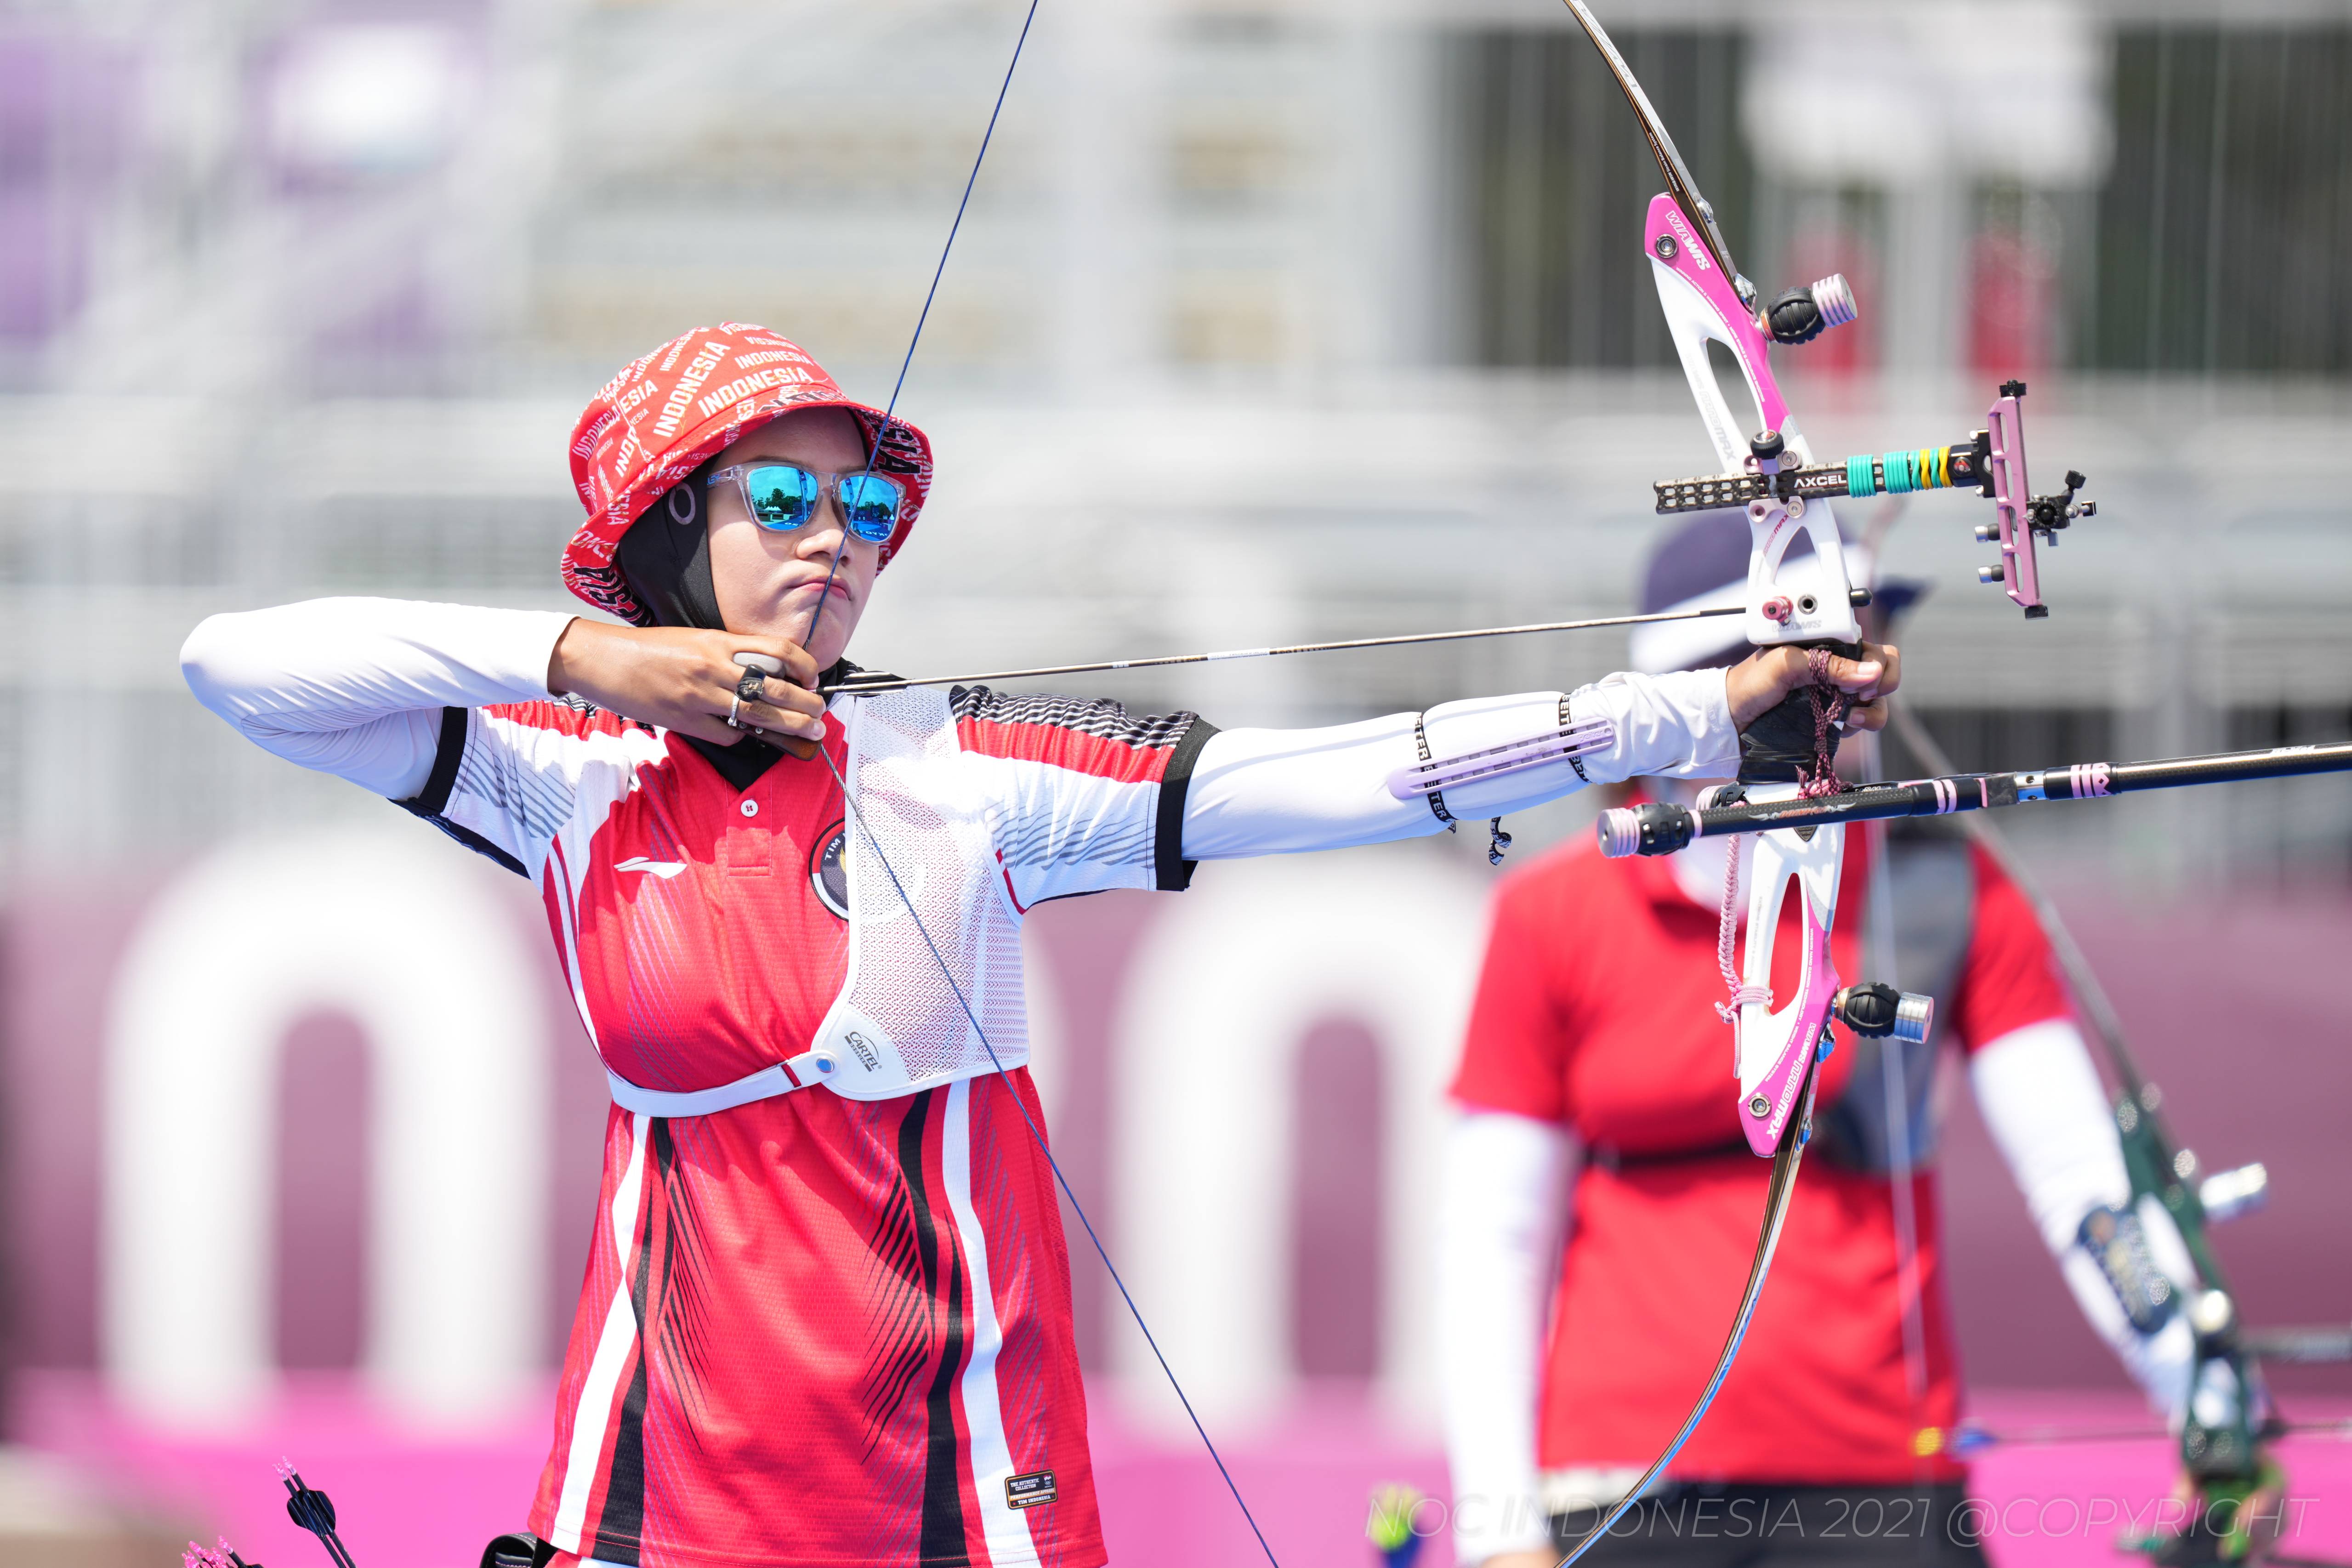 Indonesia Olympic Commitee - Archery to make history in Hangzhou 2022